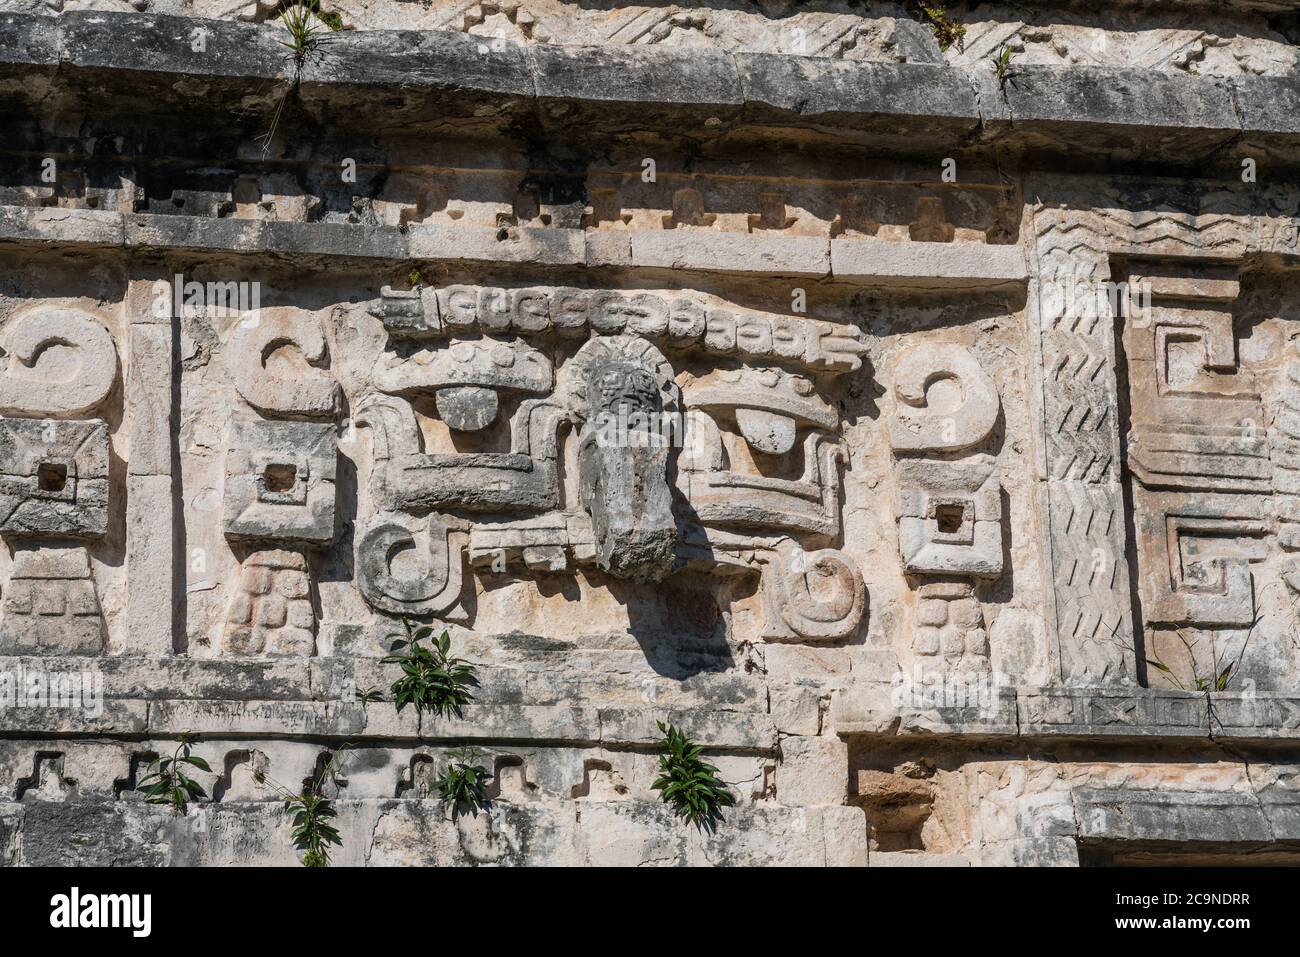 A stone carved Chaac mask on the facade of the Nunnery Complex in the ruins of the great Mayan city of Chichen Itza, Yucatan, Mexico. Stock Photo